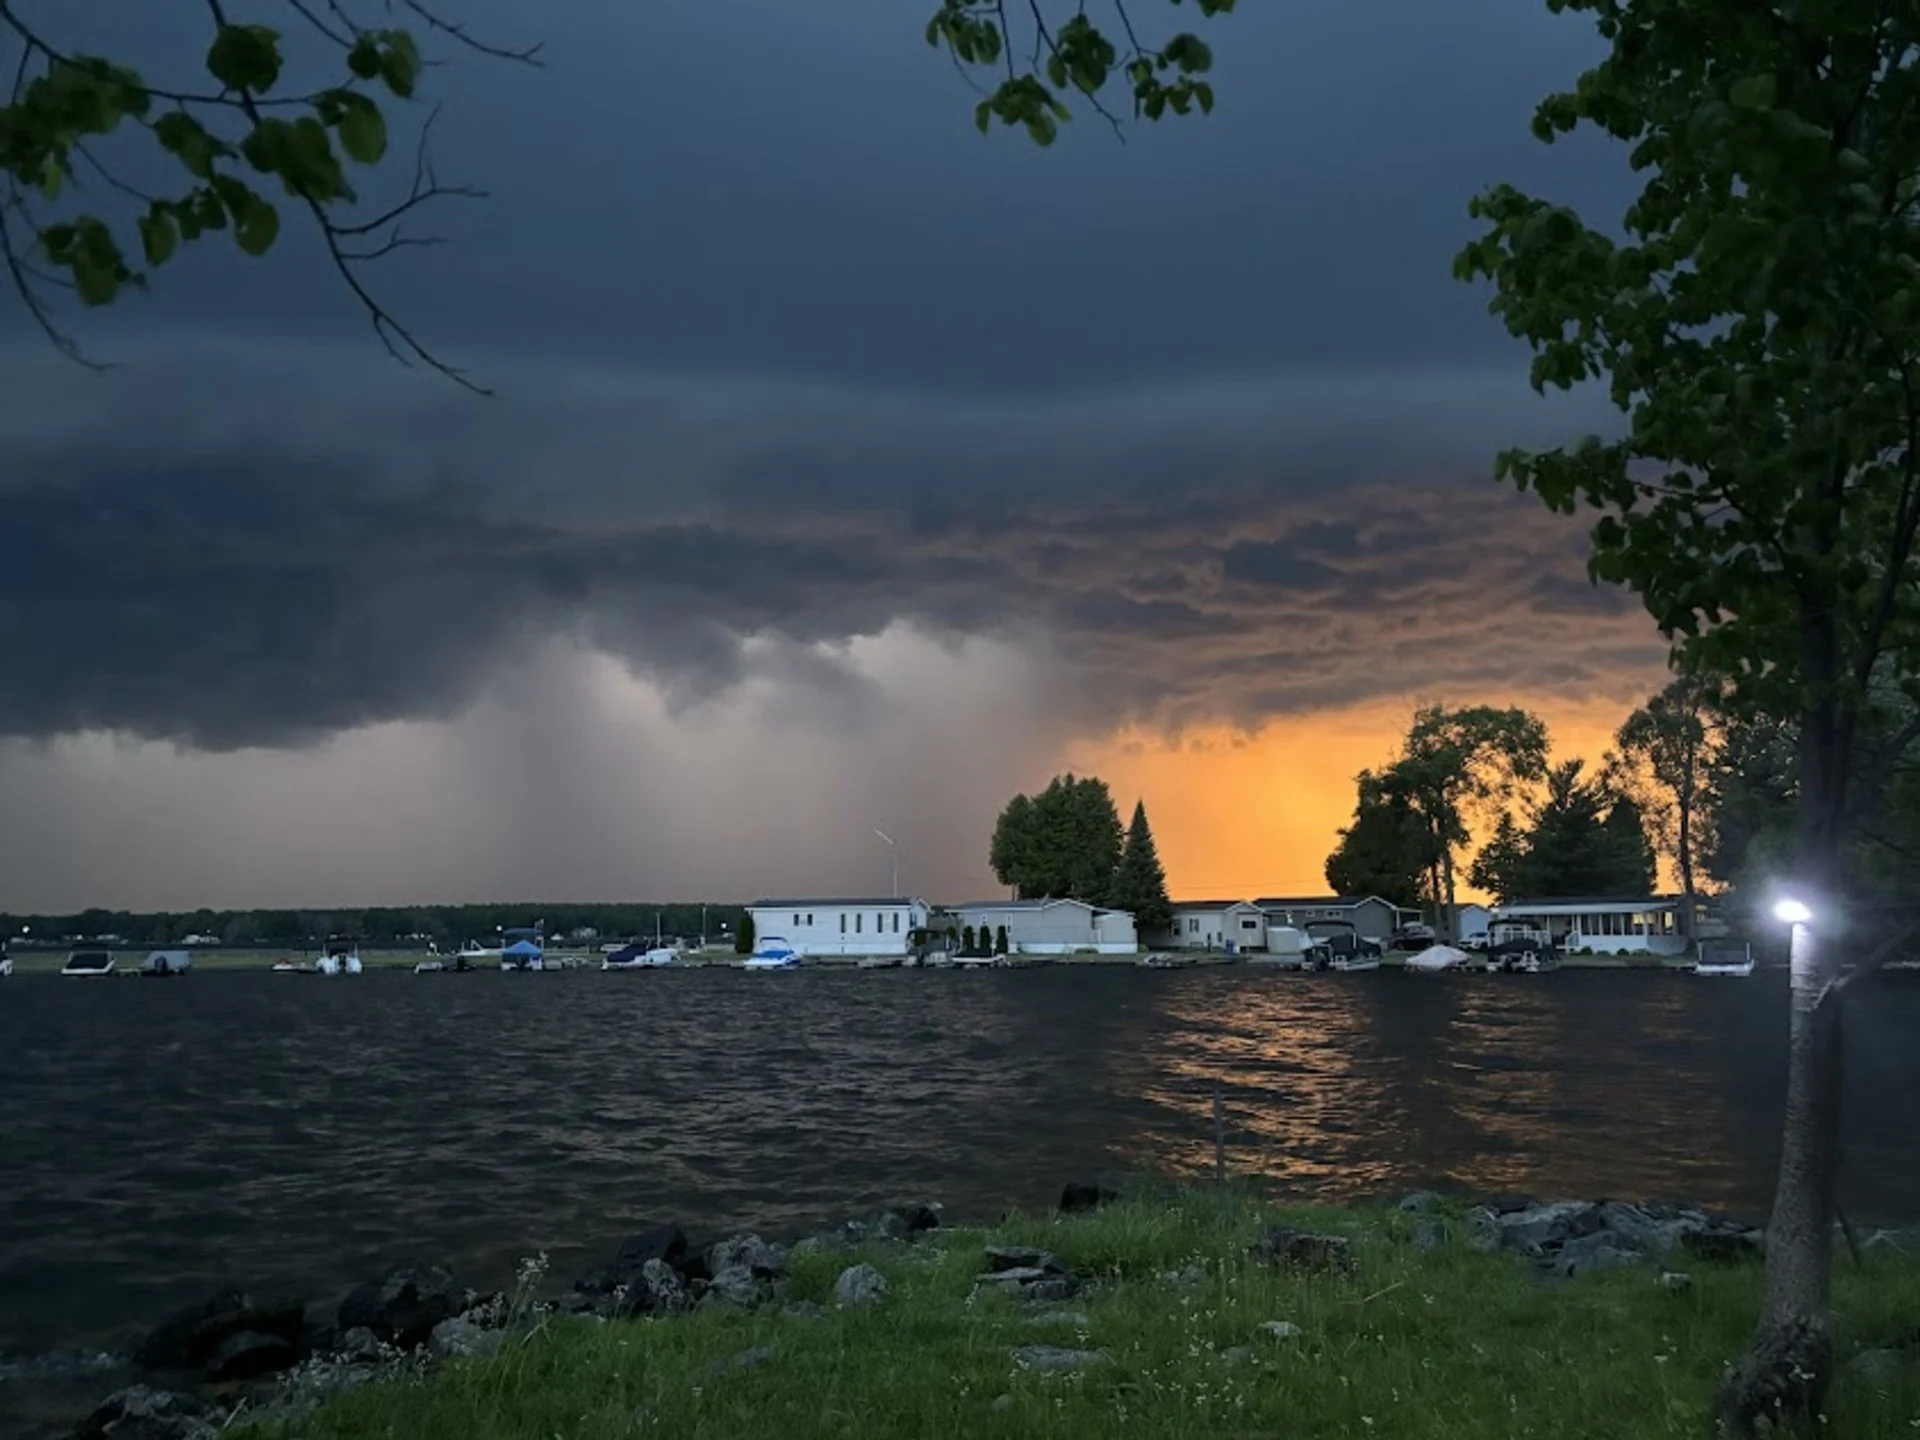 Severe storms strike across Ontario and Quebec with hail, downed trees